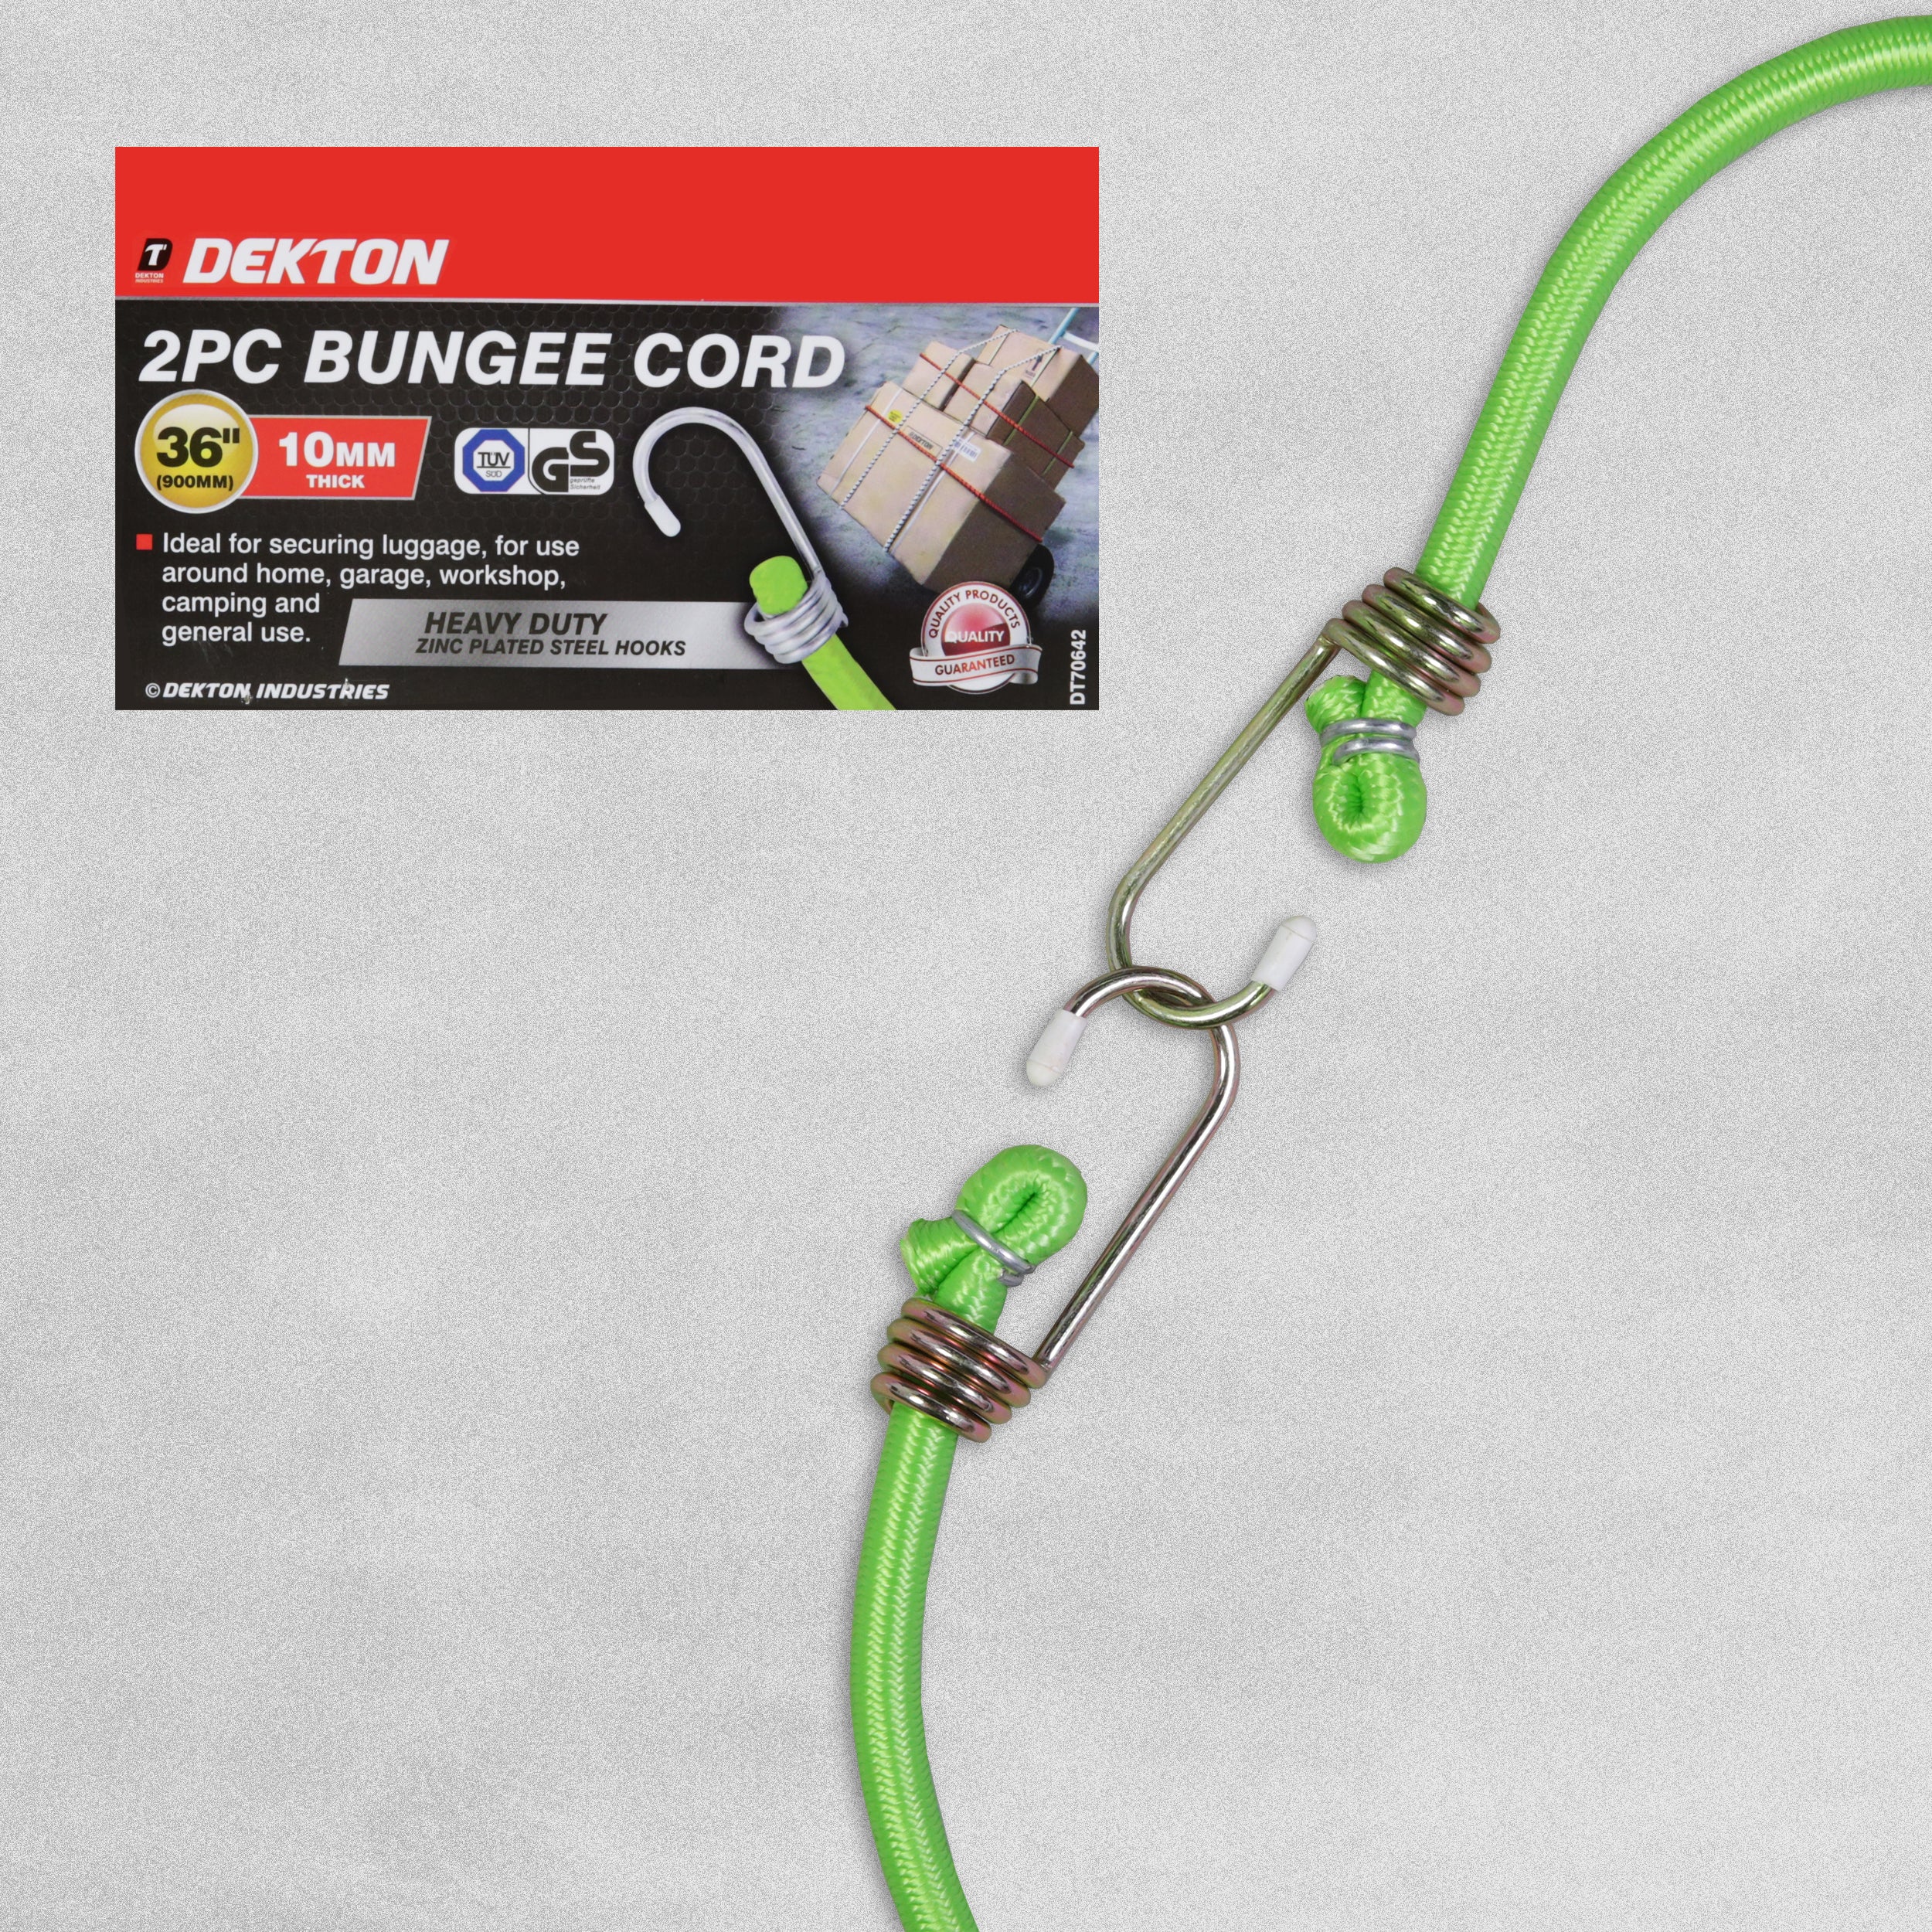 Dekton 2PC 36" 10mm Thick Bungee Cord With Zinc Plated Steel Hooks